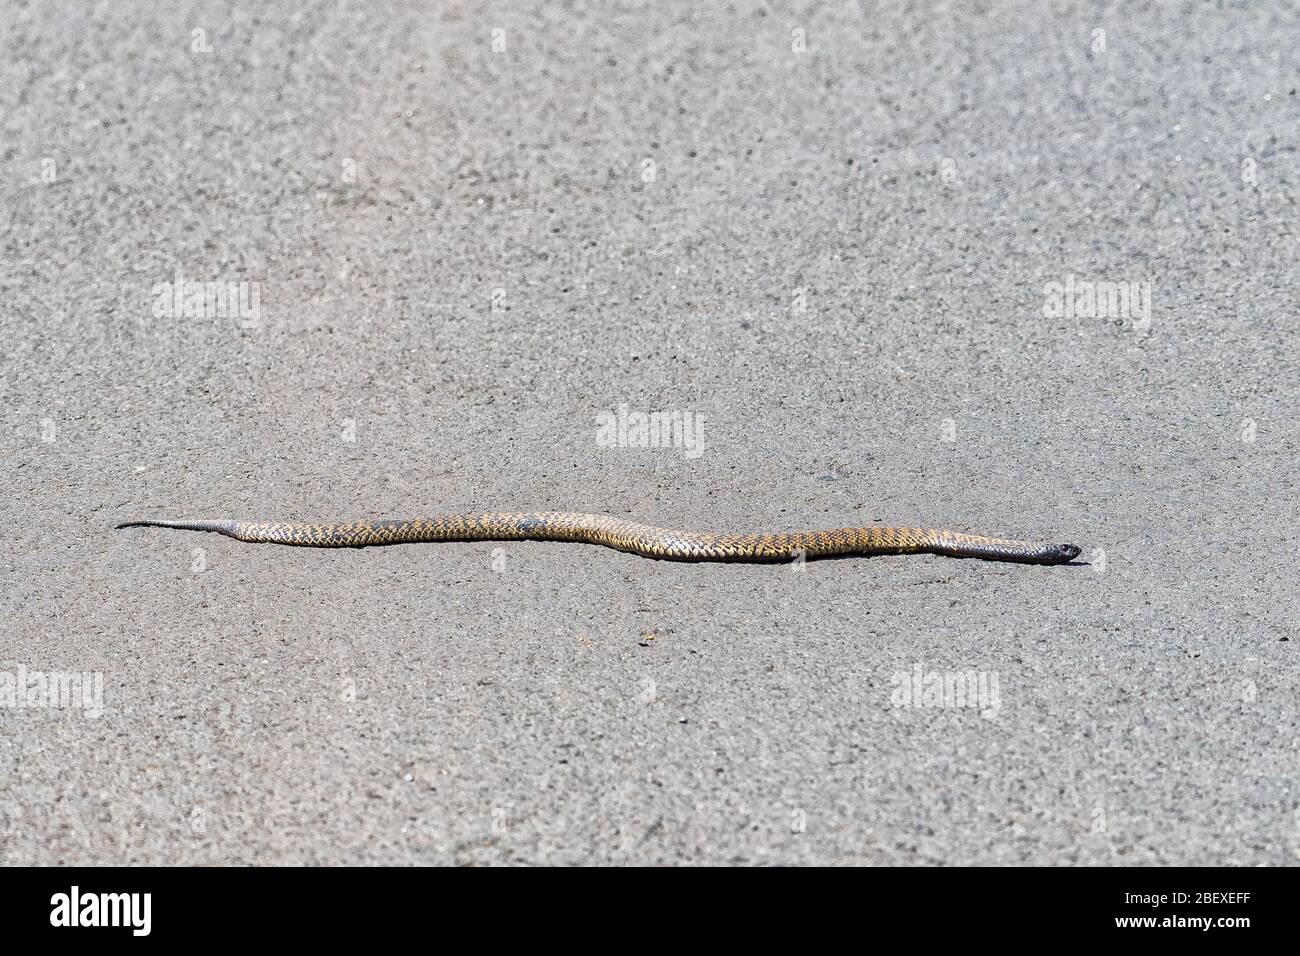 A Rinkhals, Hemachatus heamachatus, a venomous spitting cobra, slithering across a road in Golden Gate Stock Photo